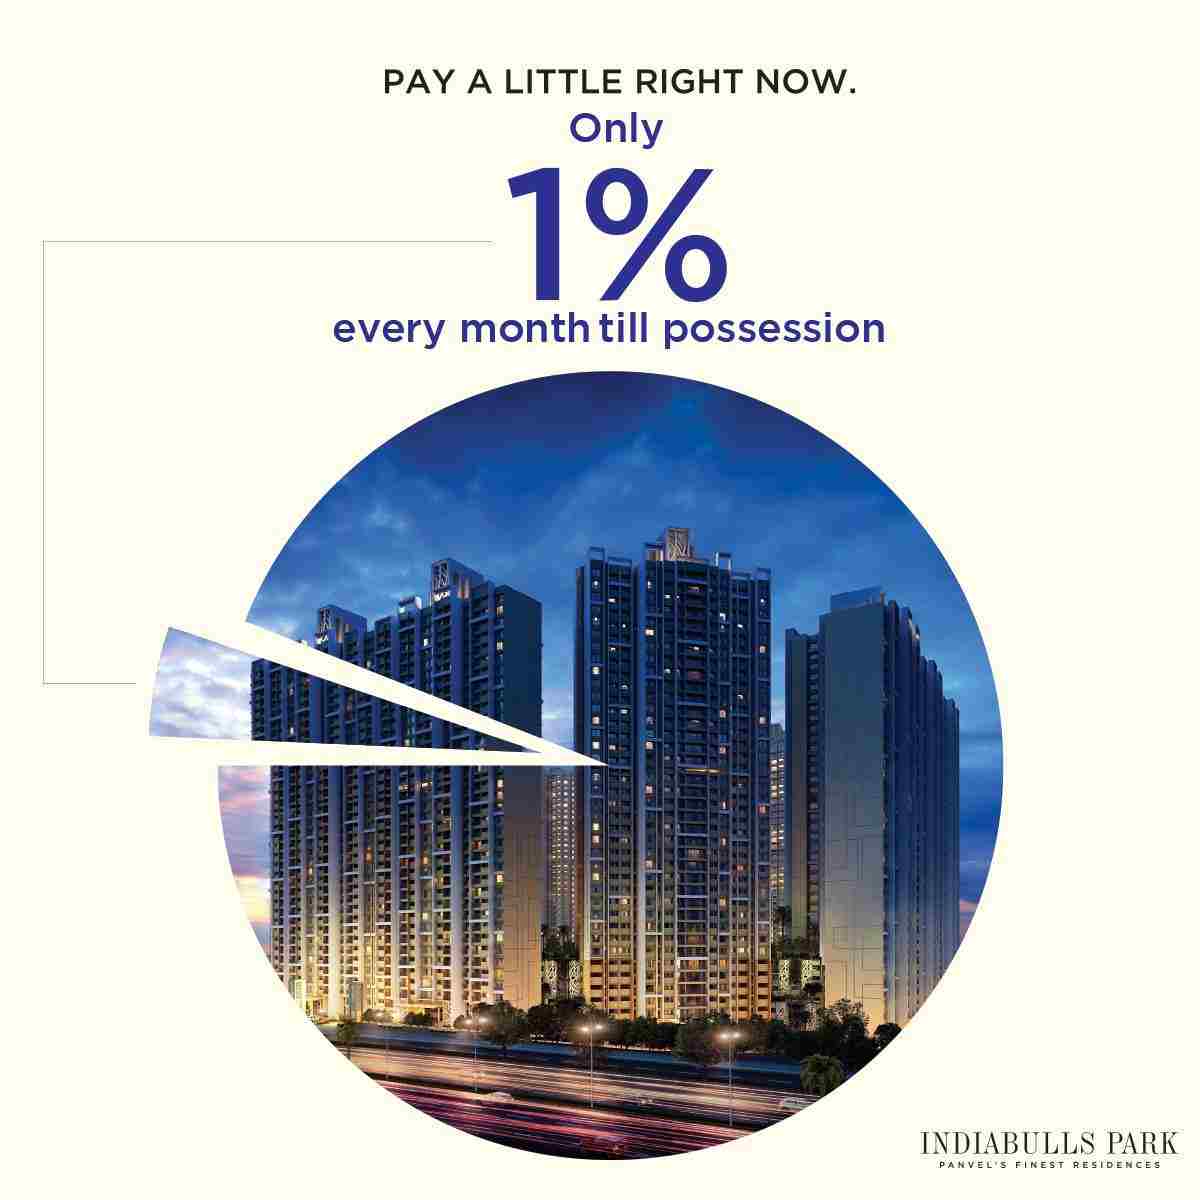 Only 1% can help you open new doors to a new life at Indiabulls Park in Navi Mumbai